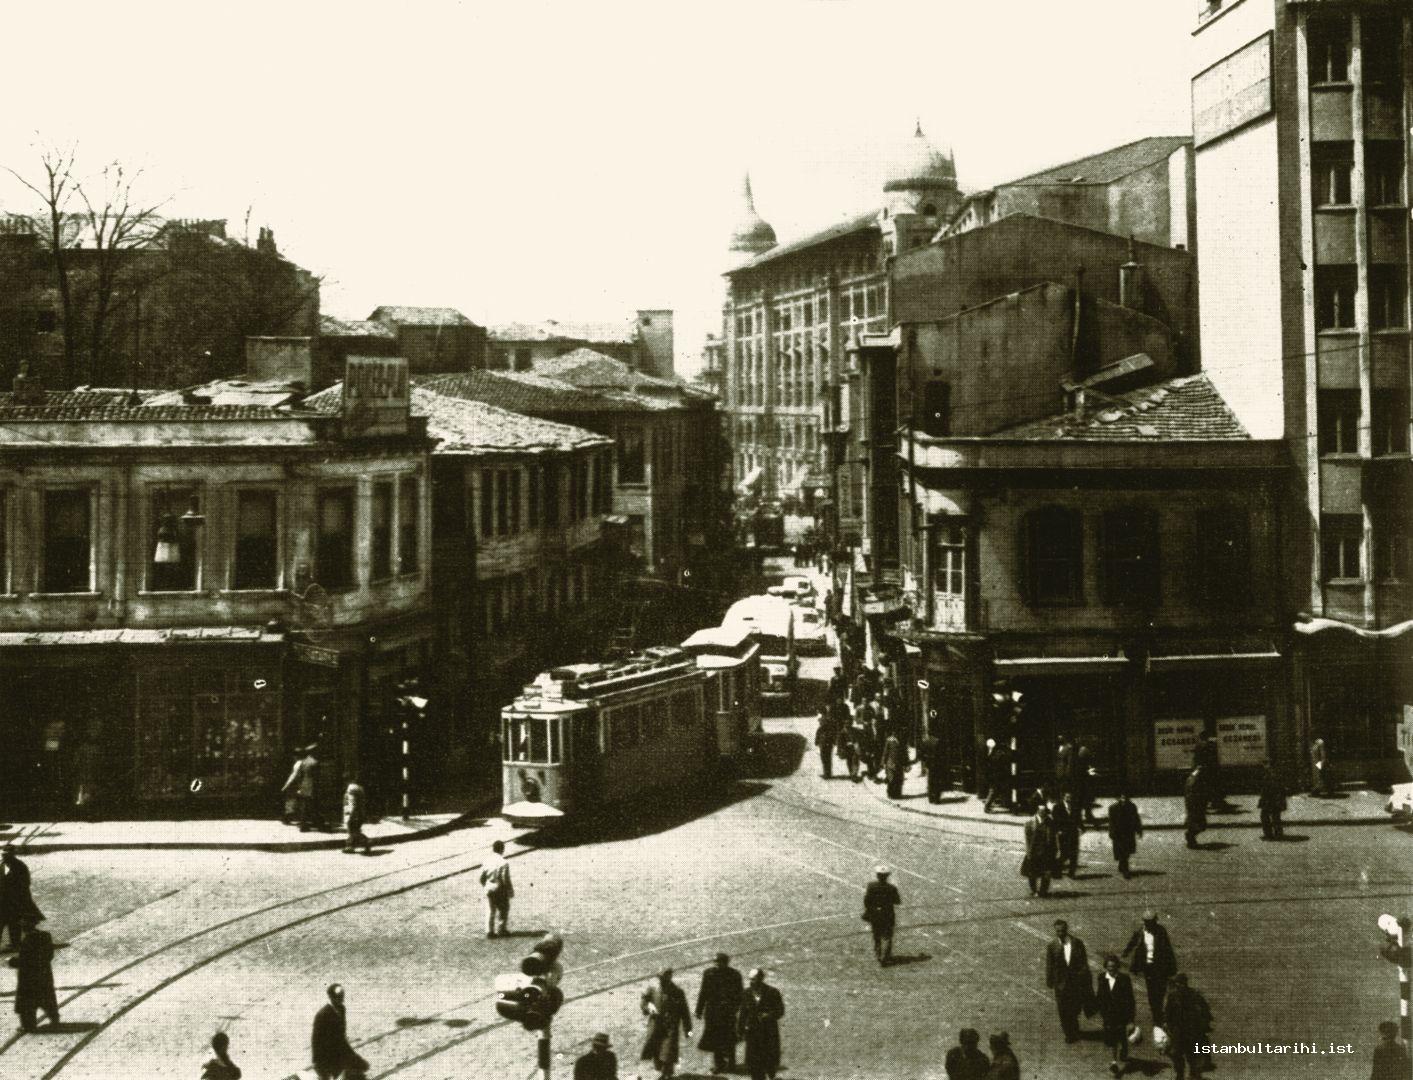 7- Sirkeci Square: The Fourth Endowment Han, a work of Architect Kemaleddin Bey is in the back. This square has also gotten its share from the urban planning operations. The tram passing from Bahçekapı and about to turn on Ankara Street should be the tram working between Maçka and Beyazıt. (<em>İstanbul’un Kitabı</em>)